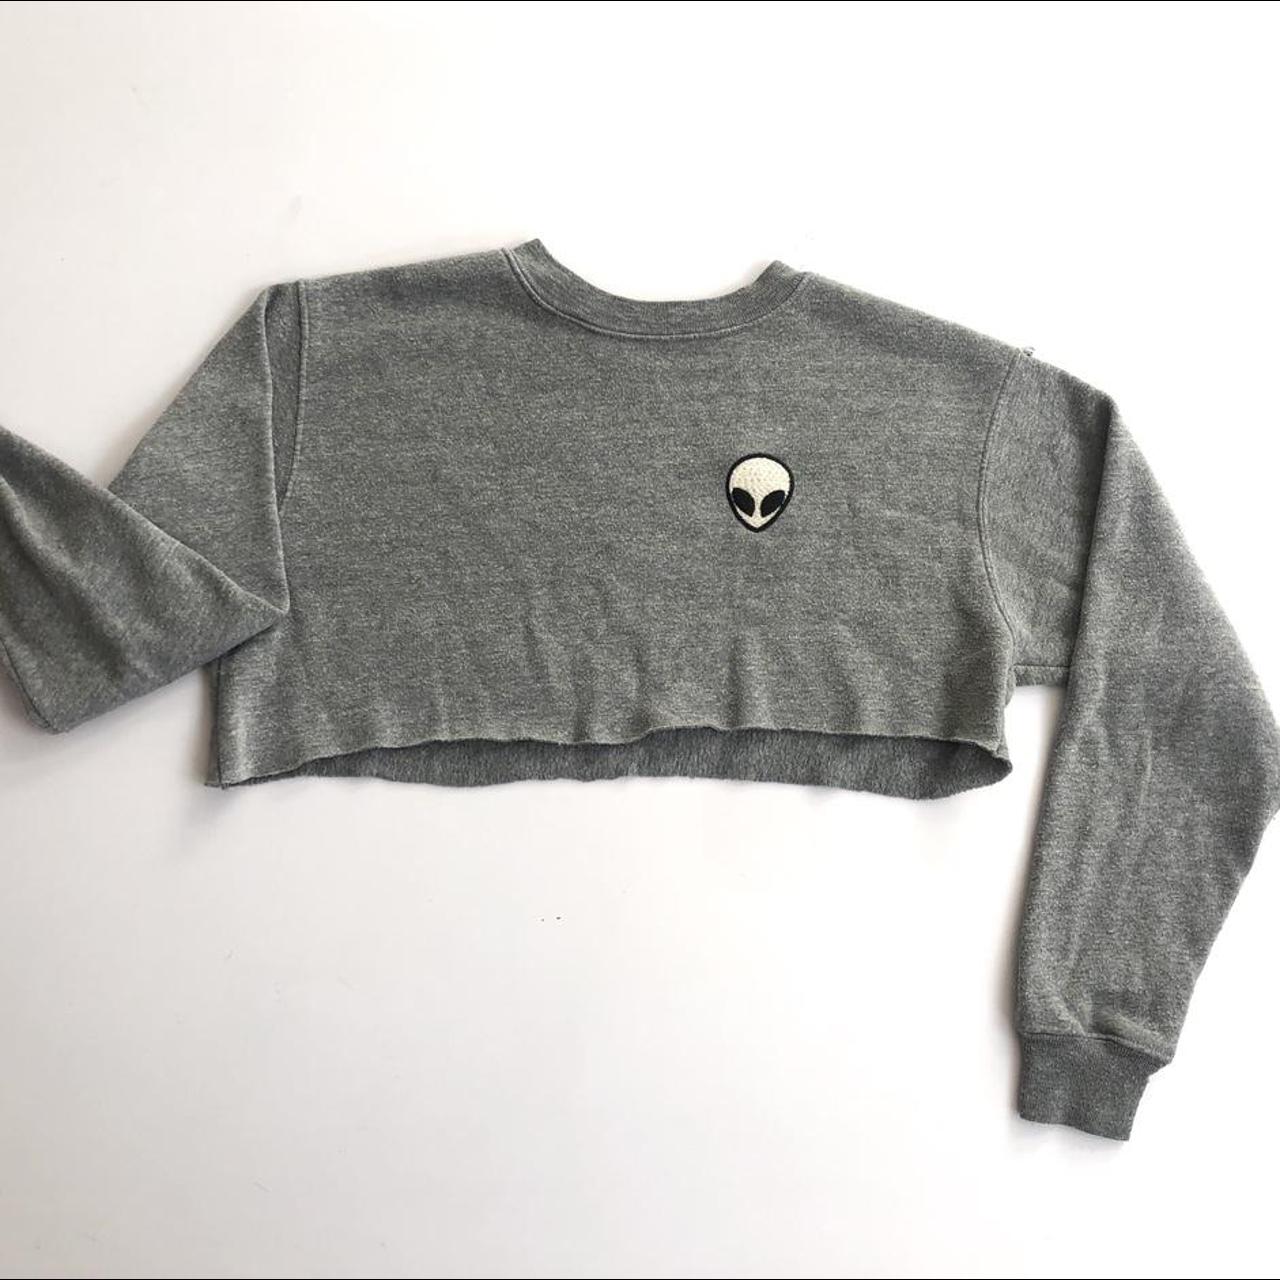 Product Image 2 - Brandy Melville cropped light grey